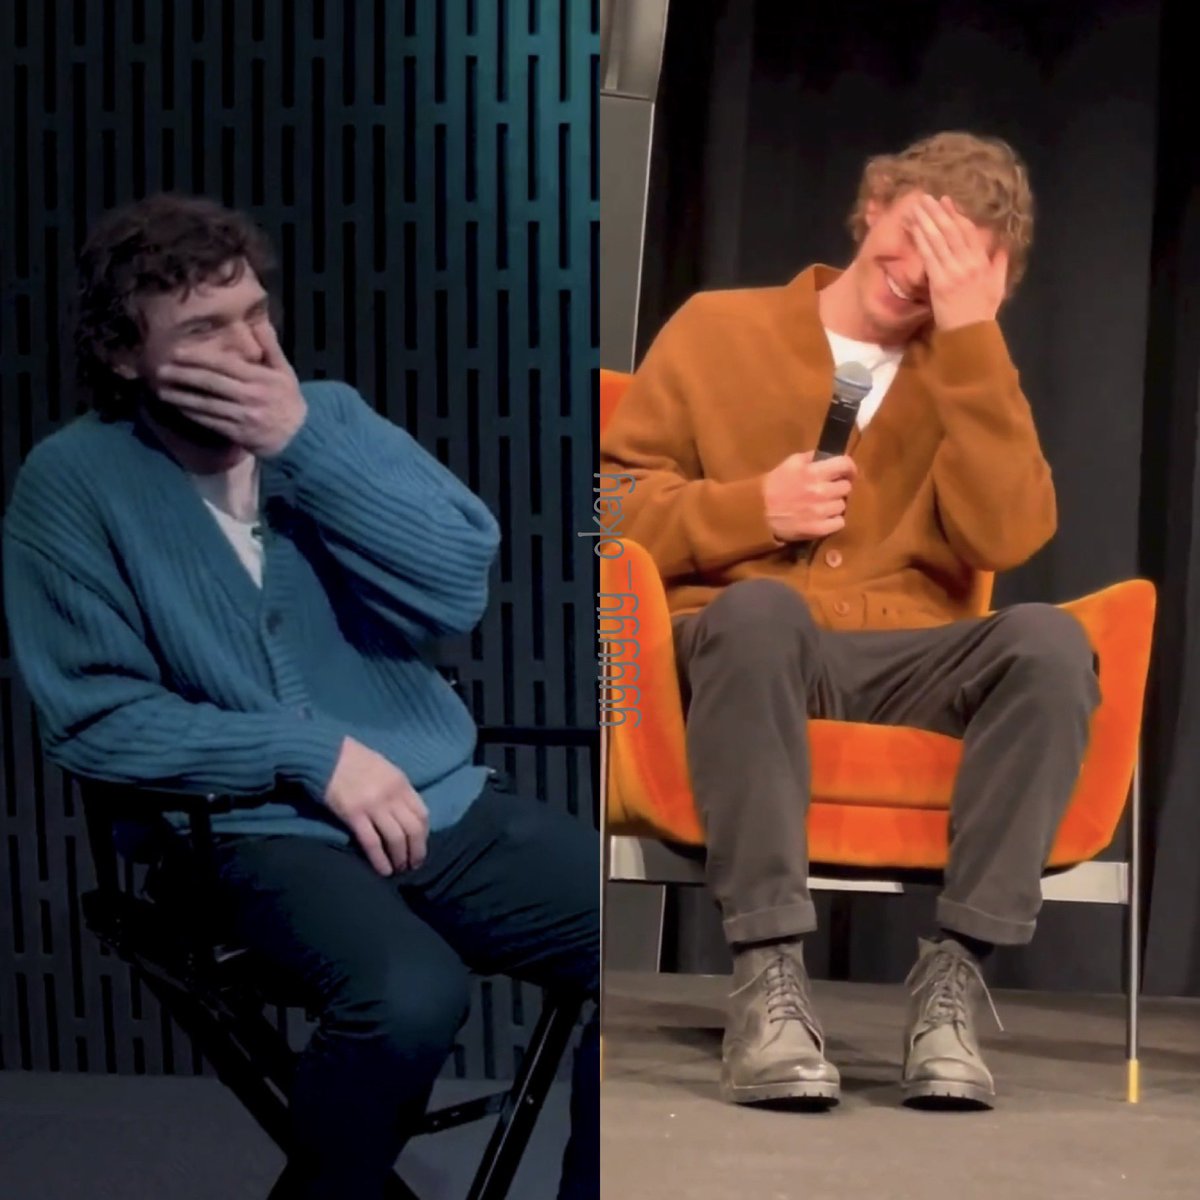 Some things never change! 😂🥴🙈
Blue or orange? That's the question!😂💙🧡 #EVANPETERS